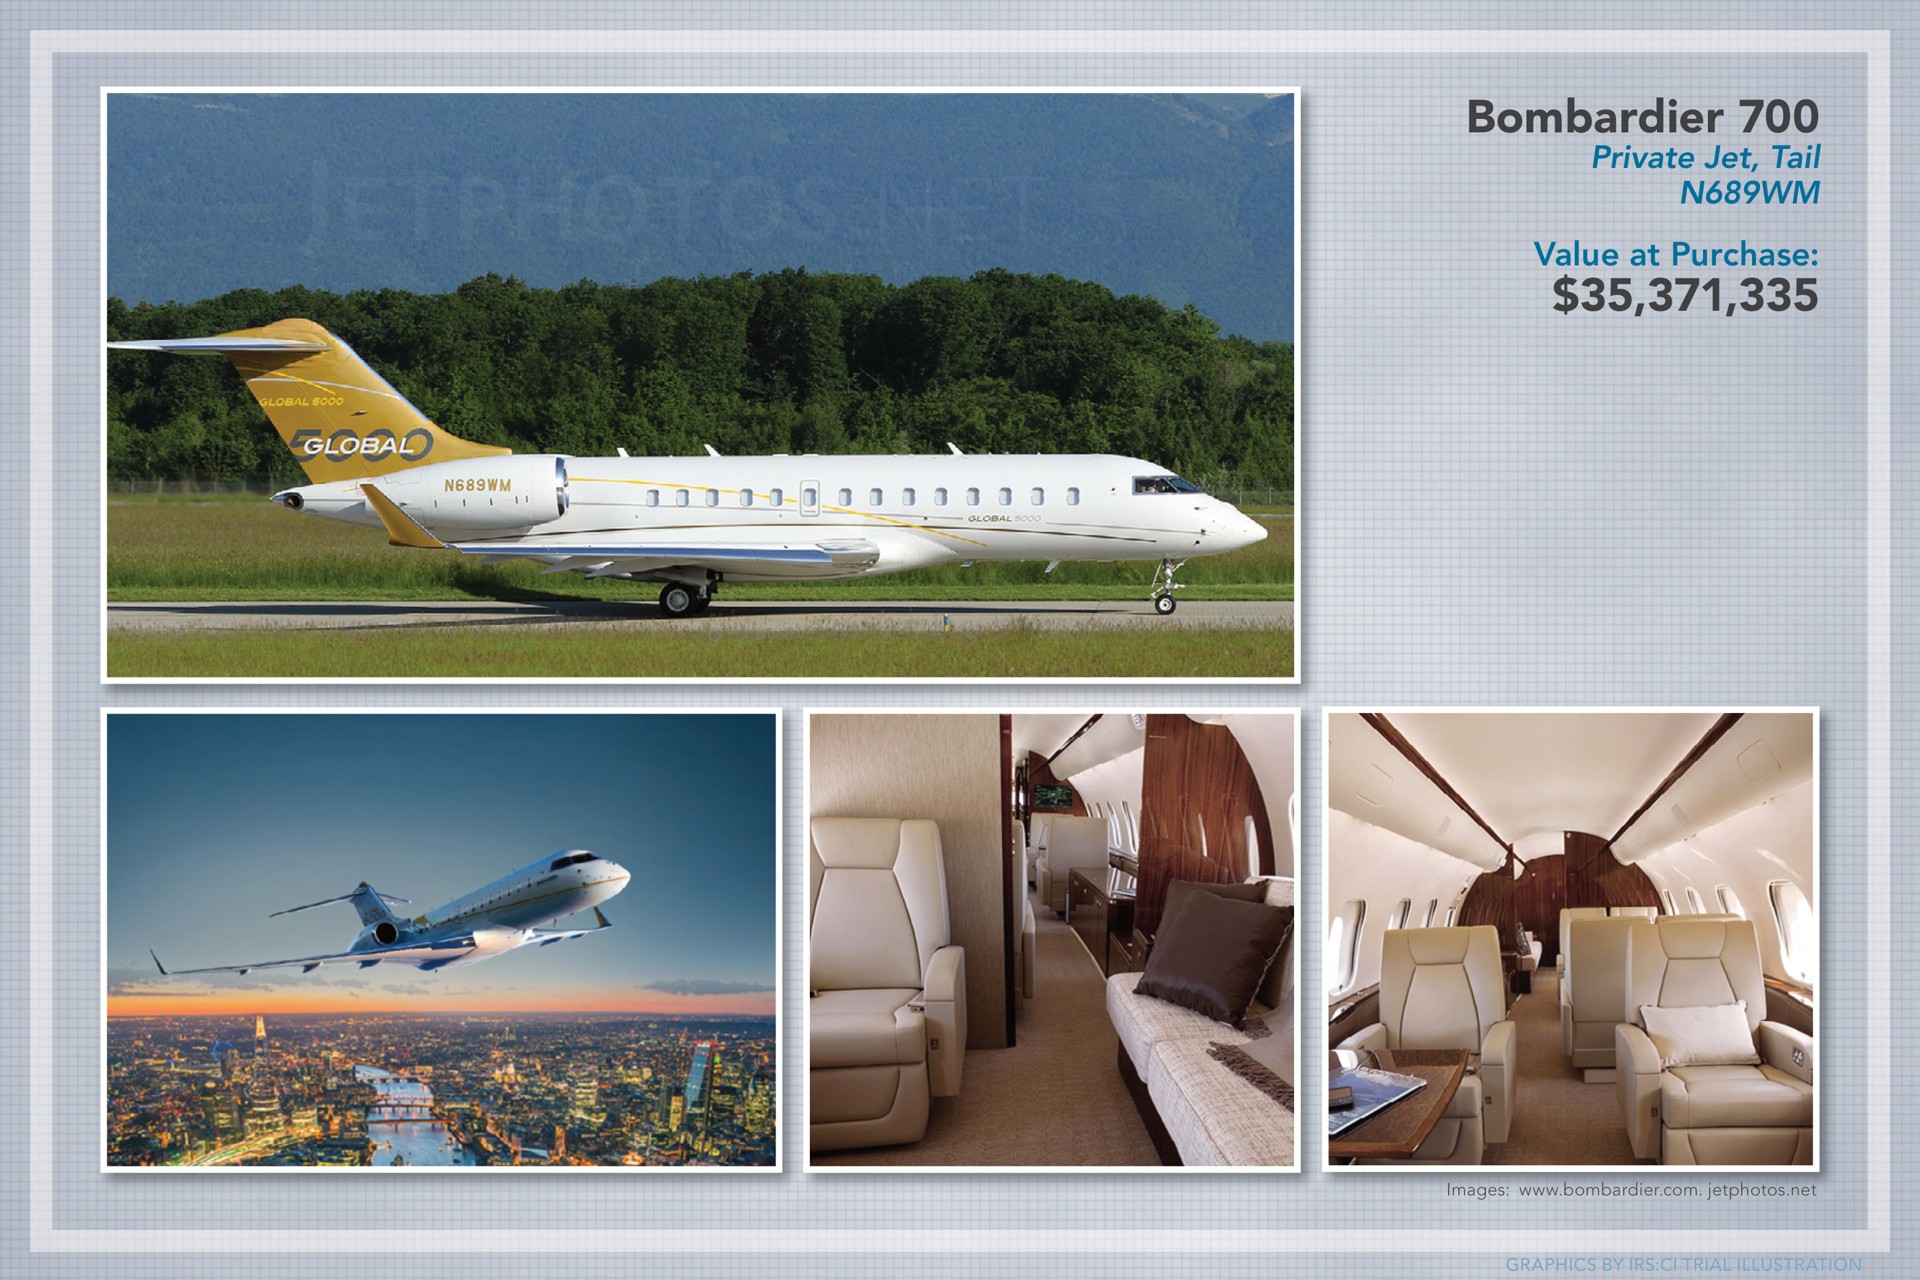 bombardier private jet tail value at purchase images bombardier net | 1MDB